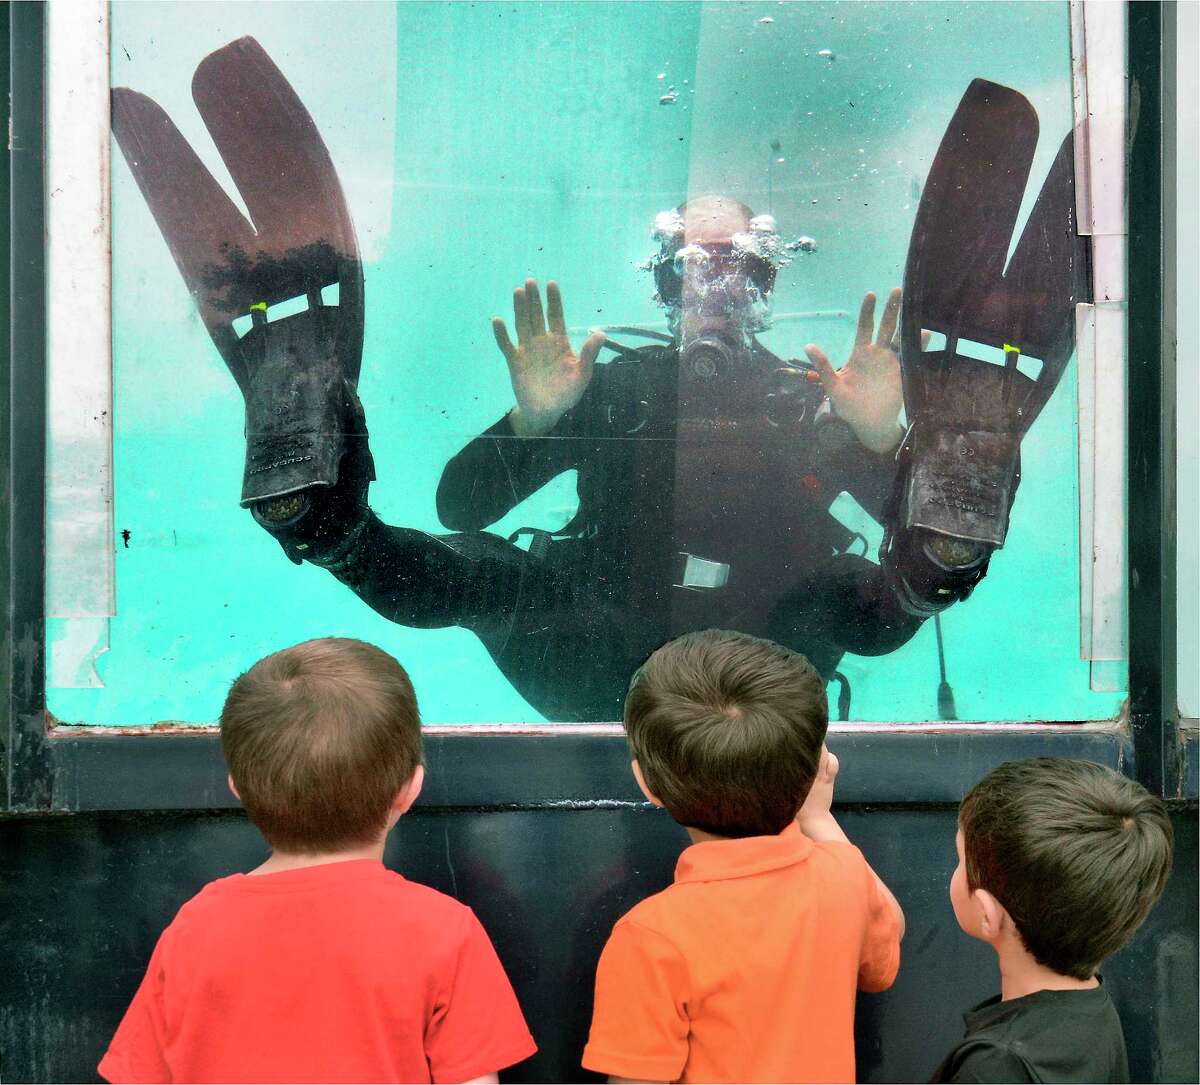 Trooper Paul Tieback of the NYSP Troop G underwater recovery team puts on a demonstration for children during Kids Day at the Plaza Saturday July 14, 2018 in Albany, NY. (John Carl D'Annibale/Times Union)